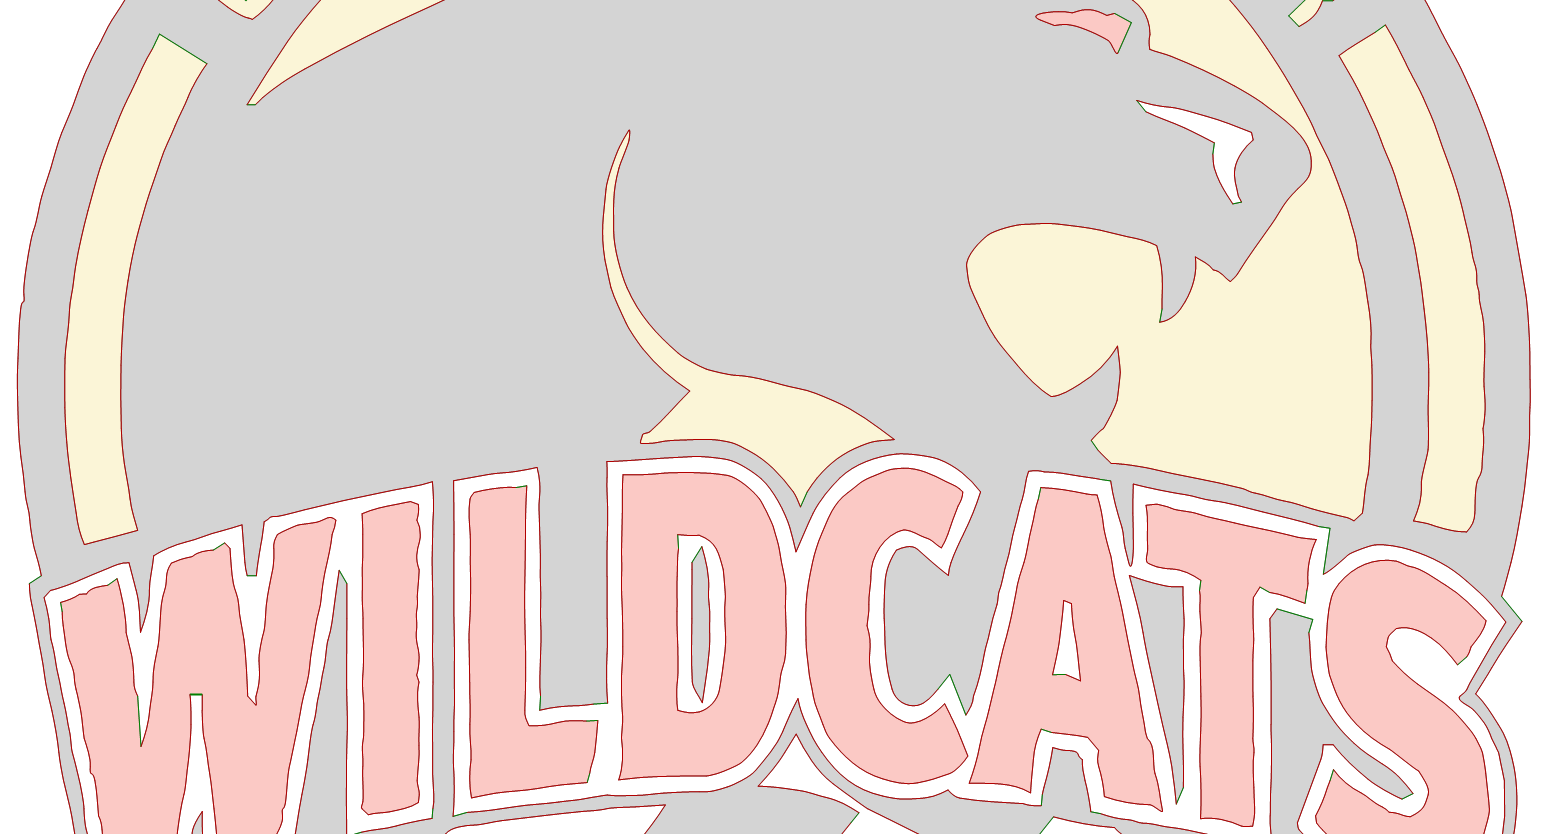 Image showing the Wildcats logotype